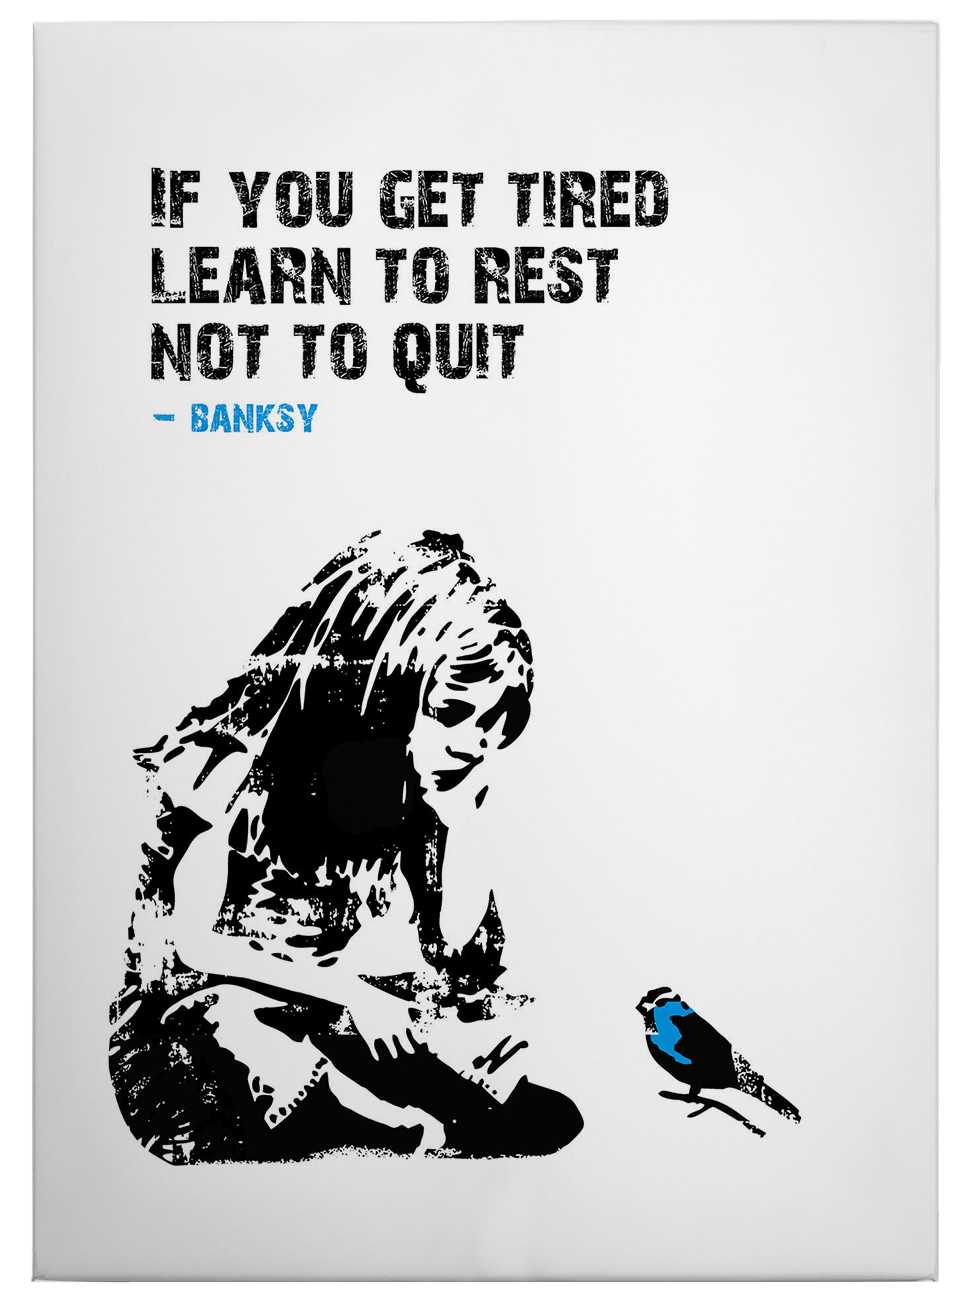             Canvas print "If you get tired" by Banksy – black and white
        